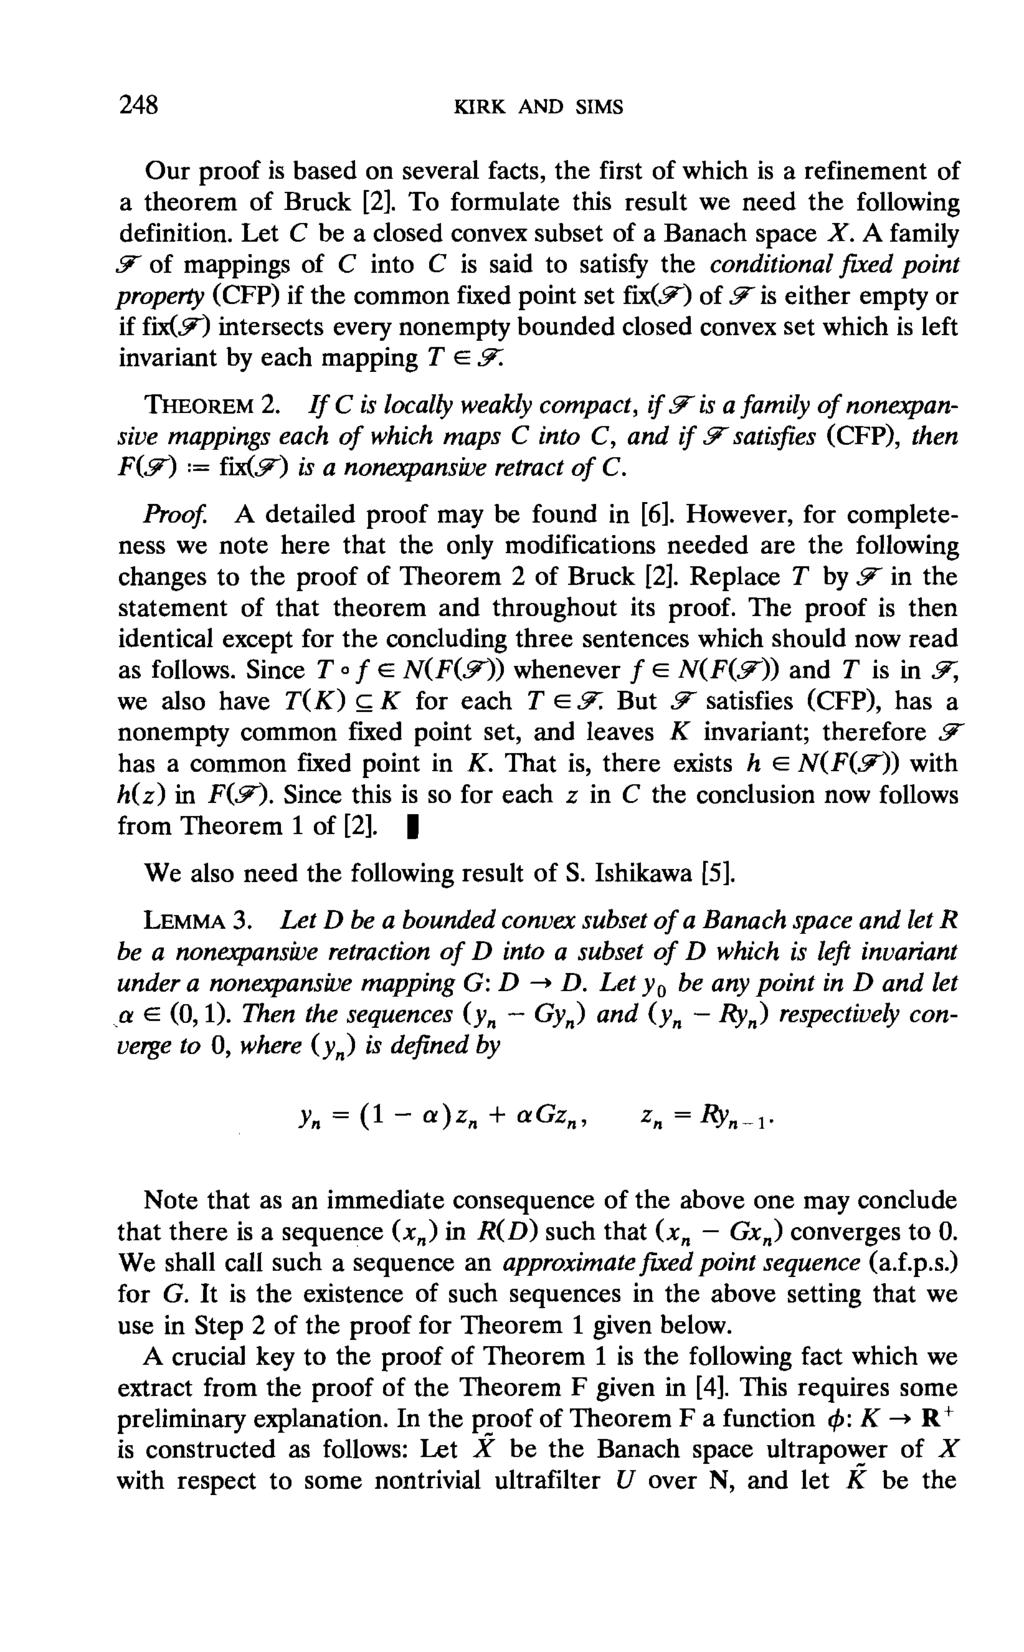 248 KIRK AND SIMS Our proof is based on several facts, the first of which is a refinement of a theorem of Bruck [2]. To formulate this result we need the following definition.